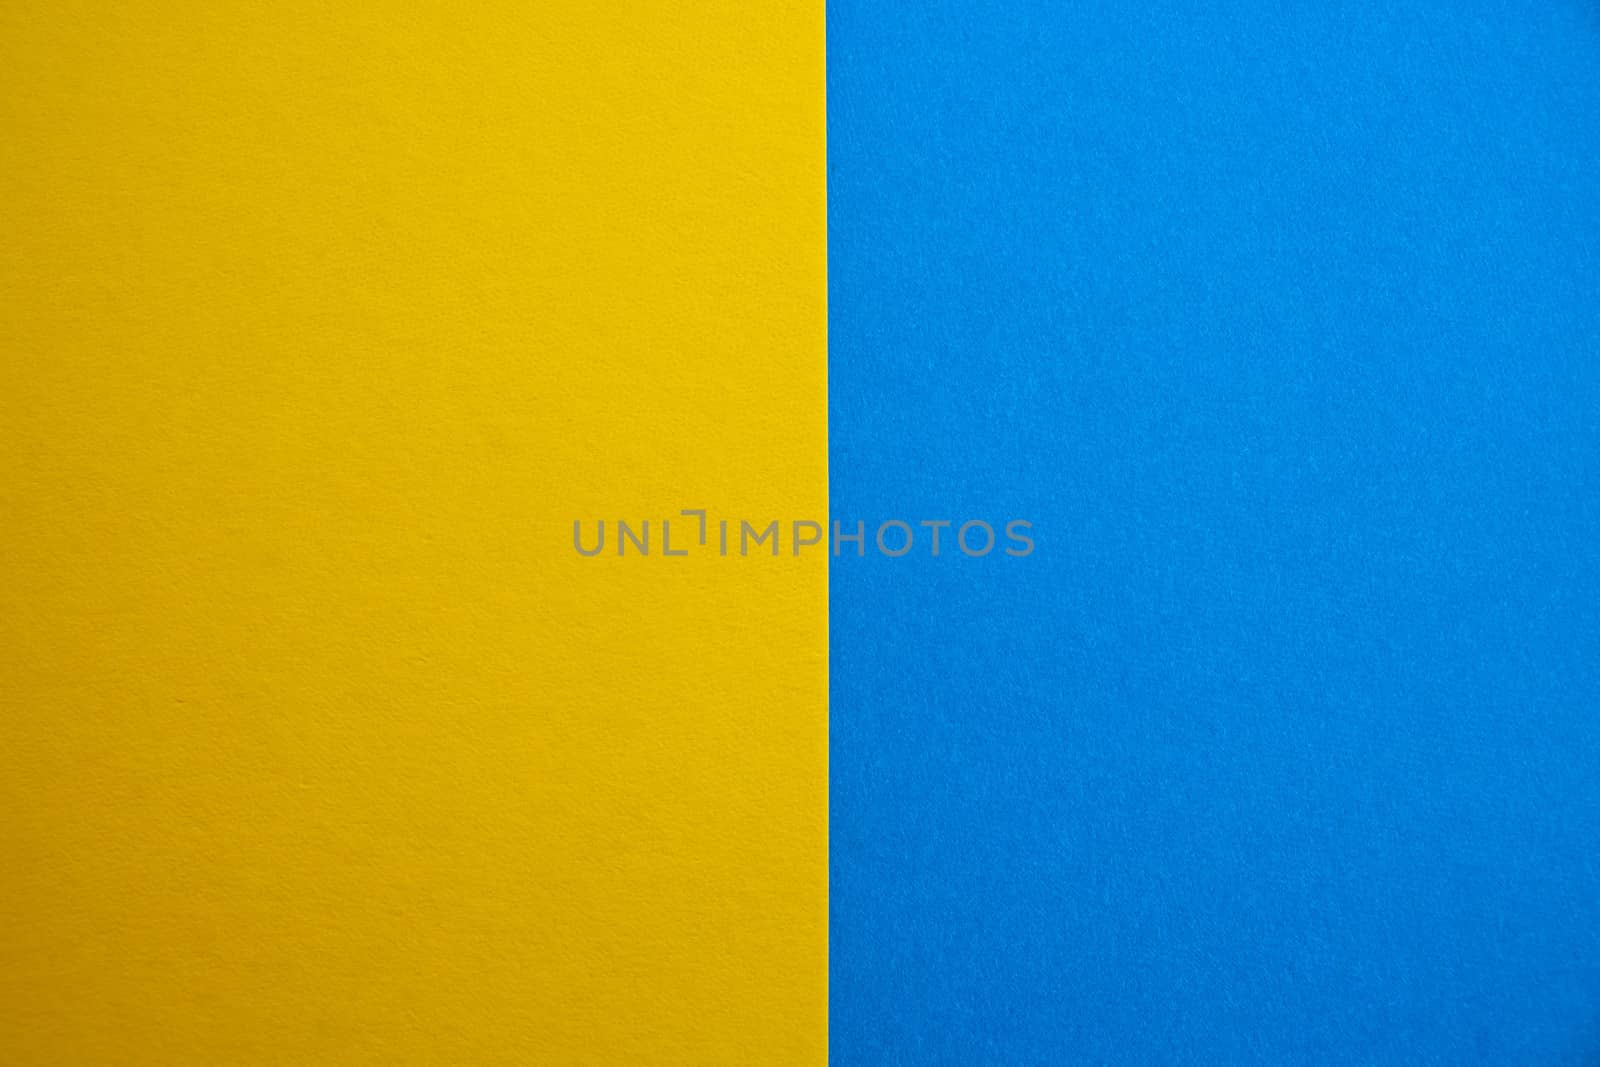 blue-yellow matte suede background, close-up. Velvety texture